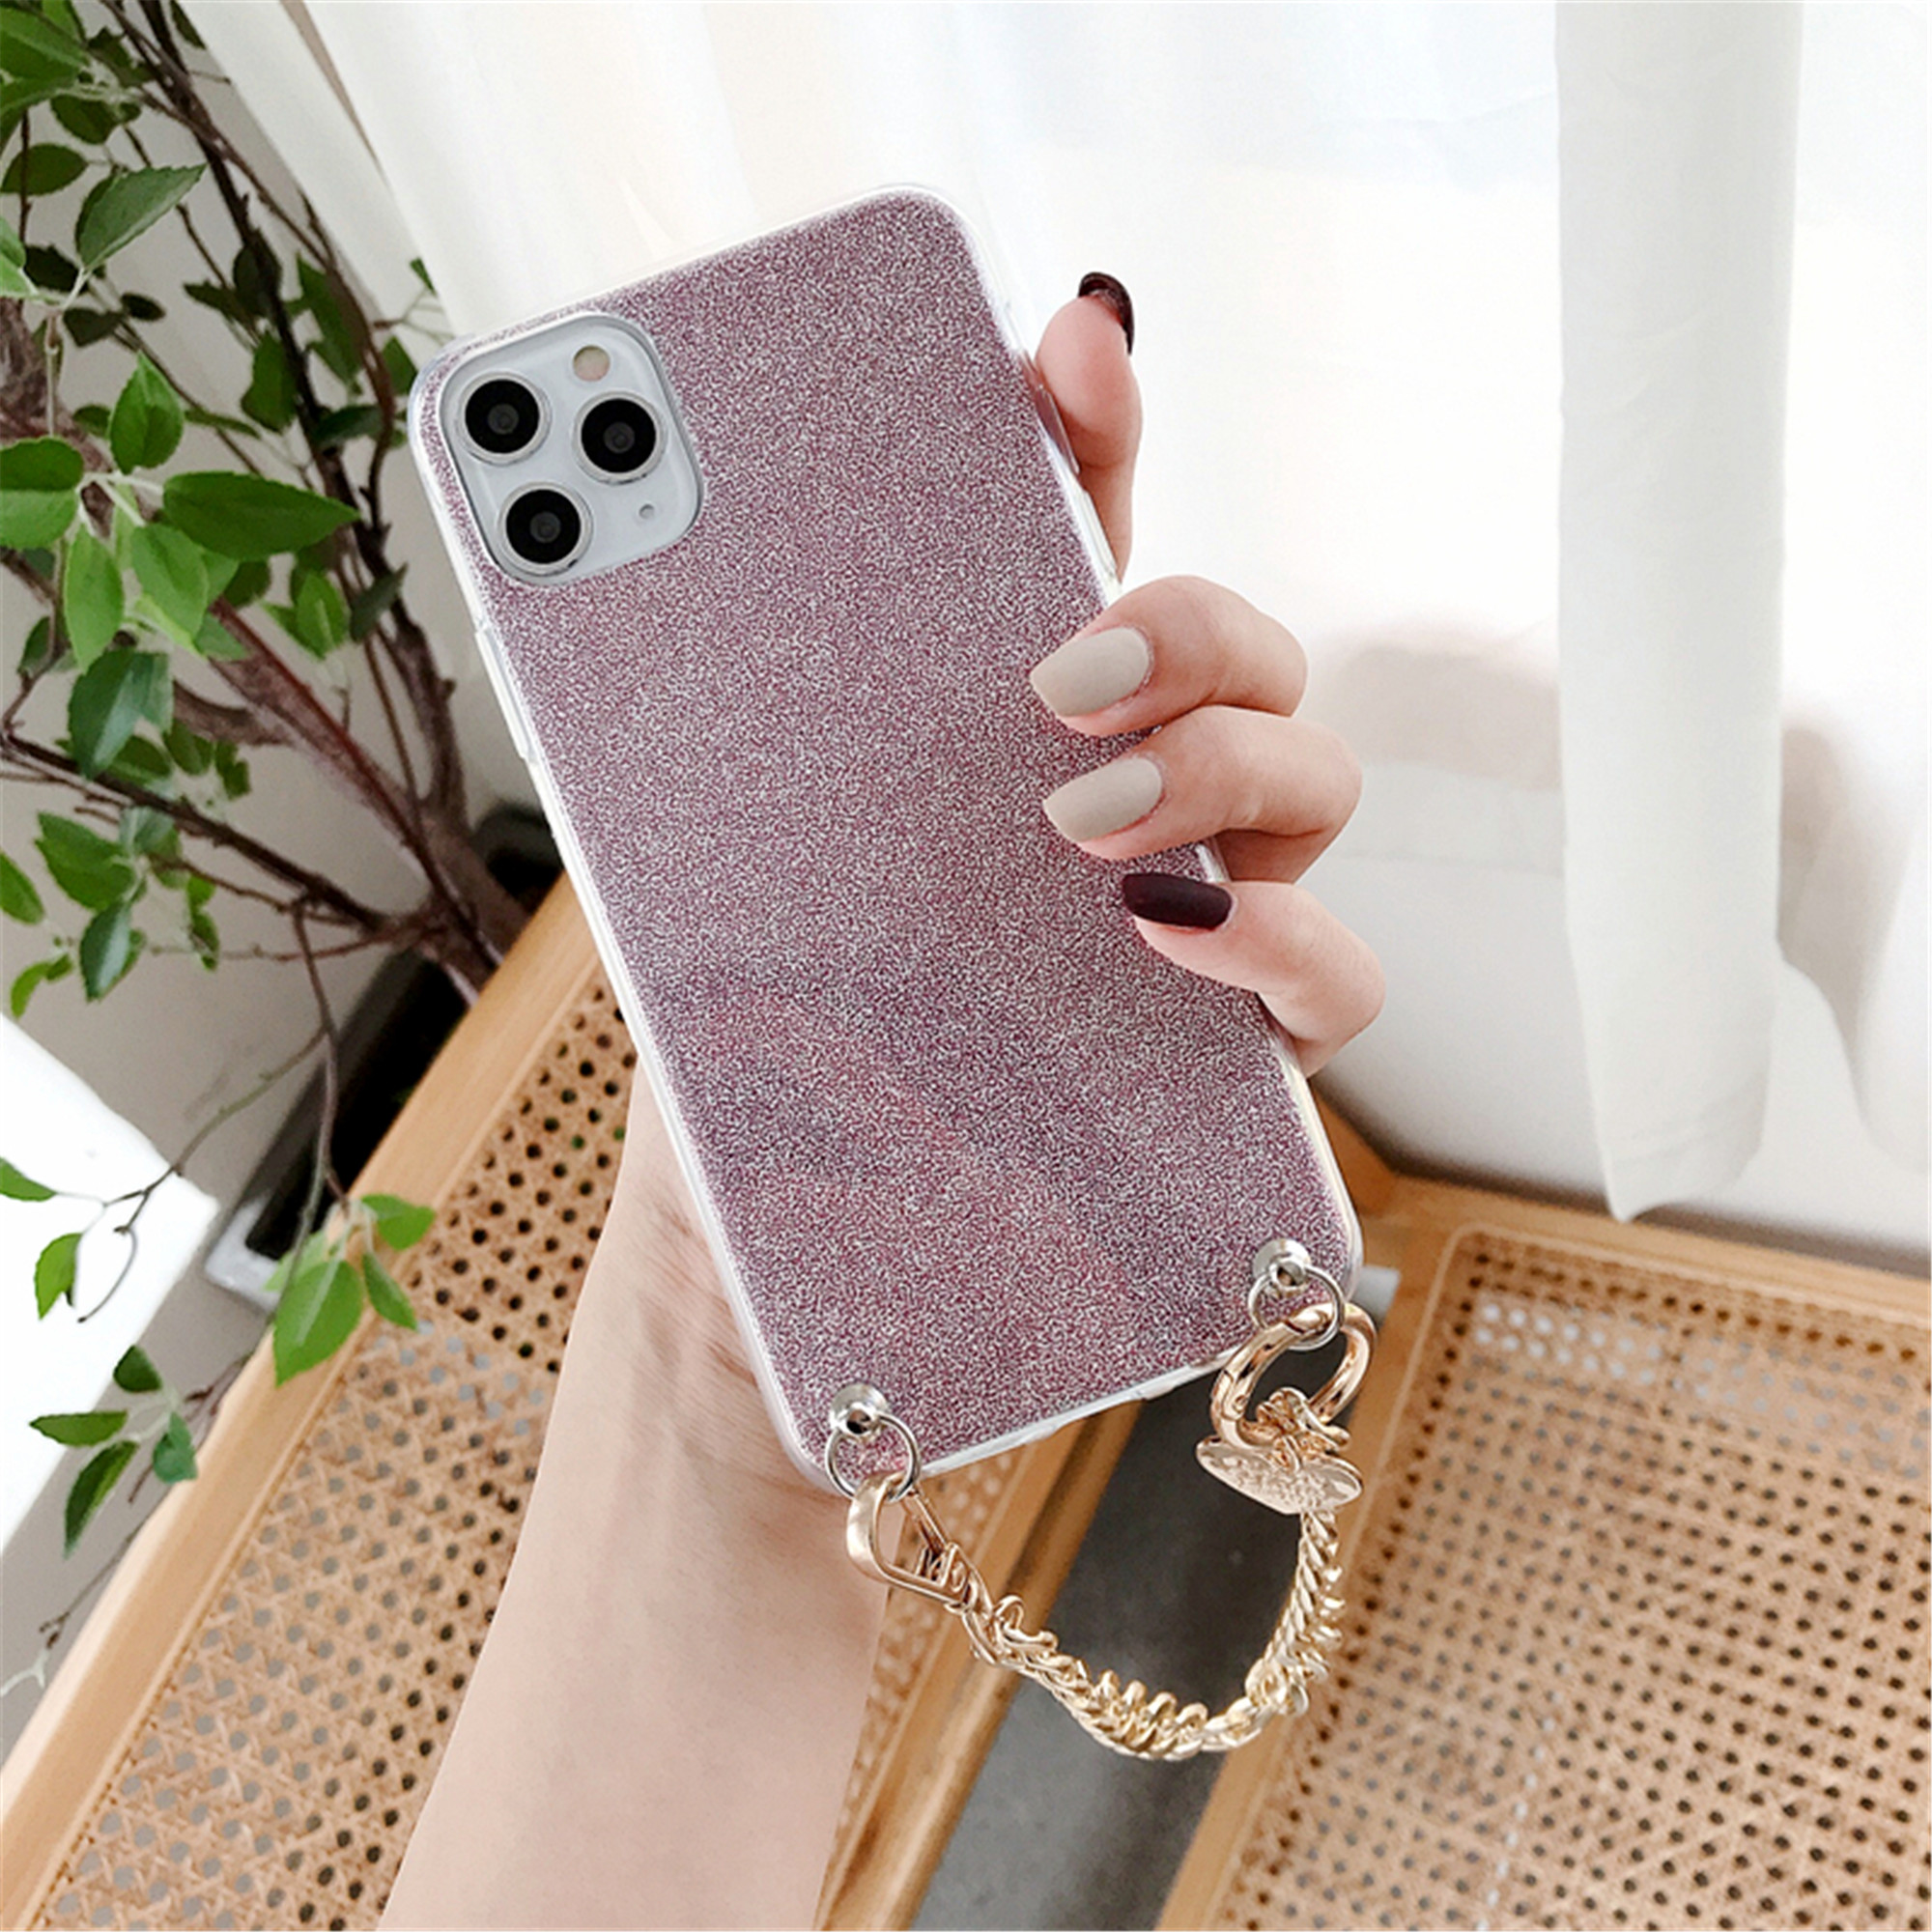 【New Product Listed】Chain Portable Glitter Phone Case for IPhone 6 6s 6p 6sp 7 8 SE2 7p 8p X Xr Xs Xsmax 11 11pro 11promax